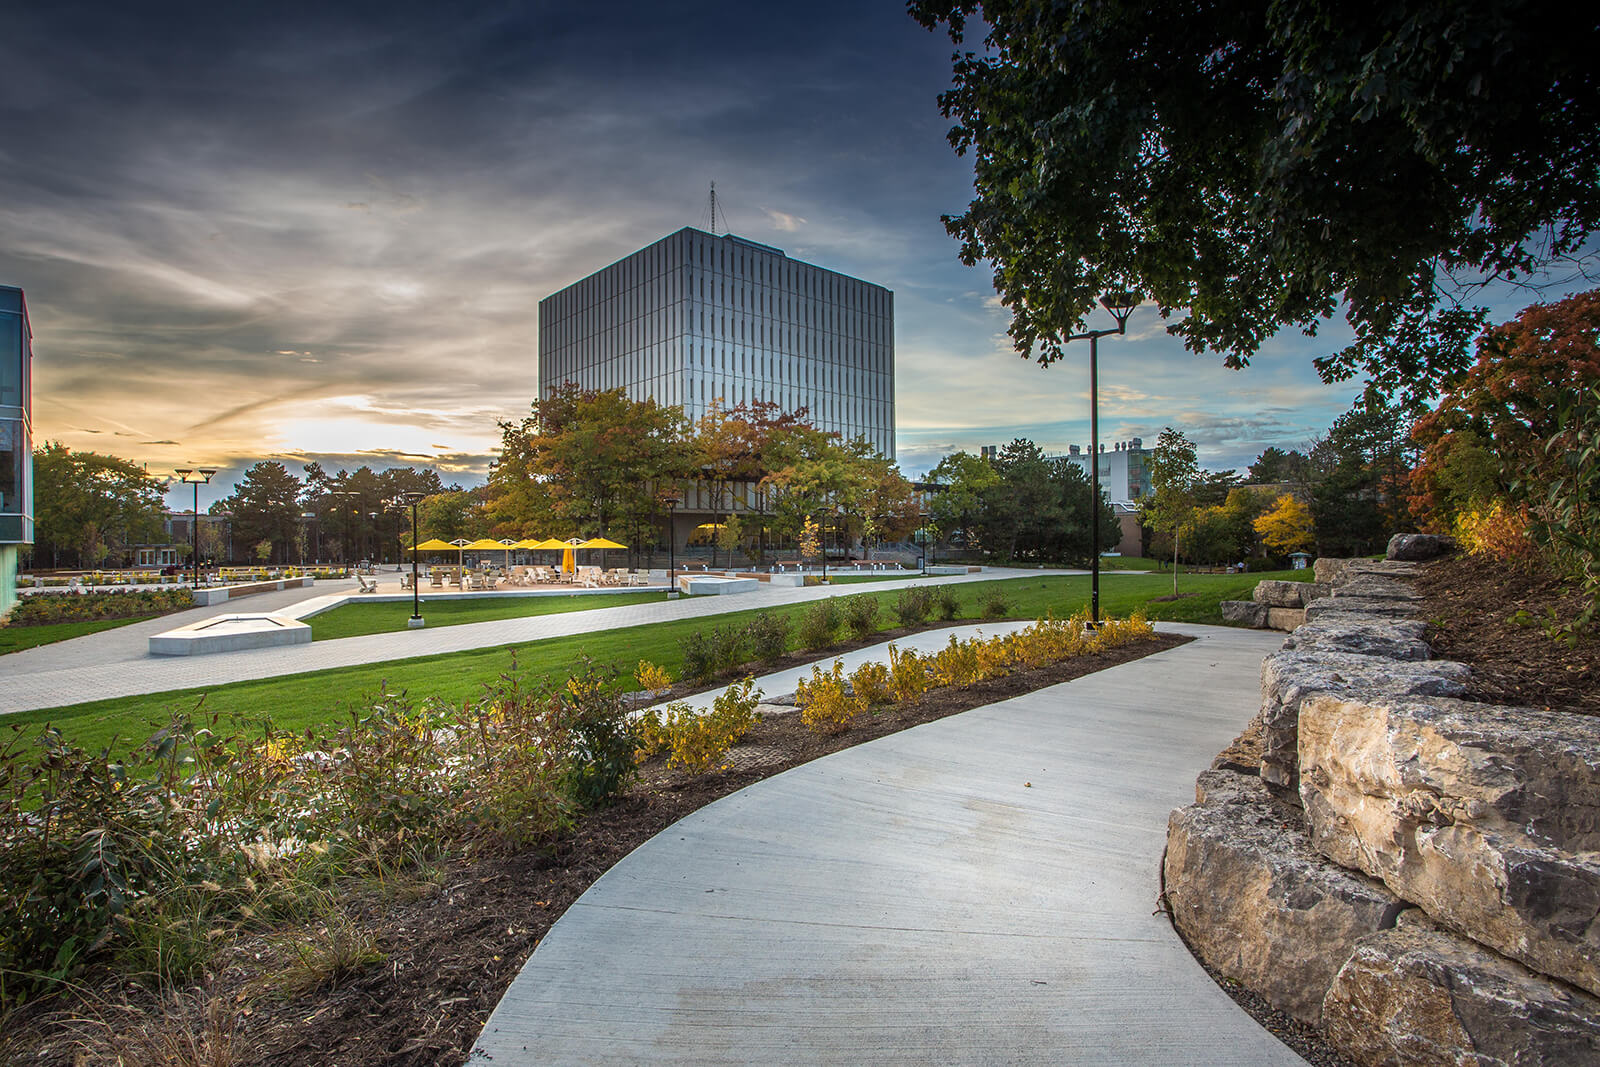 CSL Group won the or the Caterpillar National Award of Landscape Excellence in Commercial Construction.